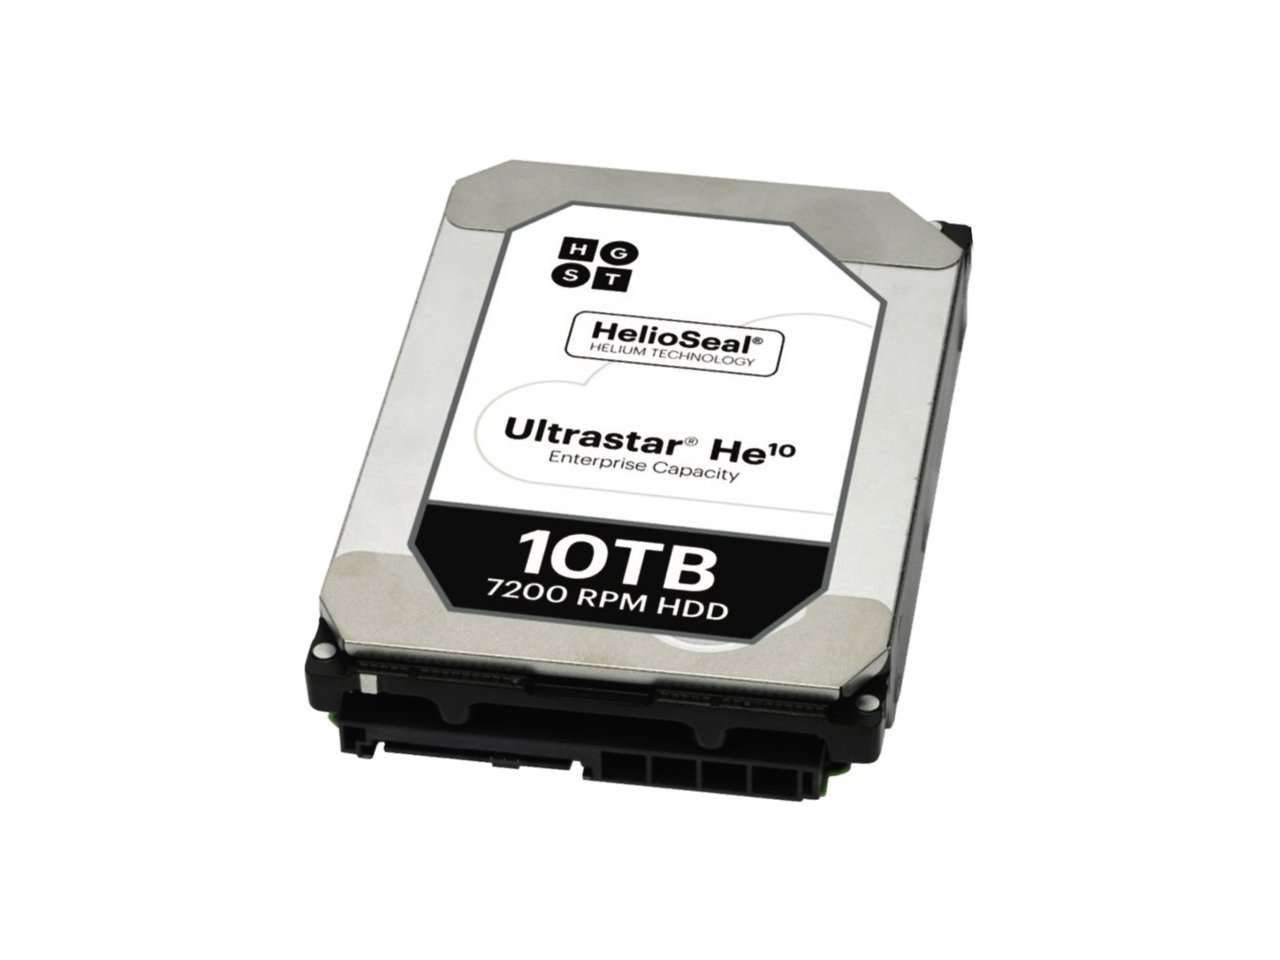 HGST Ultrastar He10 0F27506 HUH721008ALN601 8TB 7.2K RPM SATA 6Gb/s 4Kn 256MB Cache 3.5" SED Power Disable Pin Manufacturer Recertified HDD